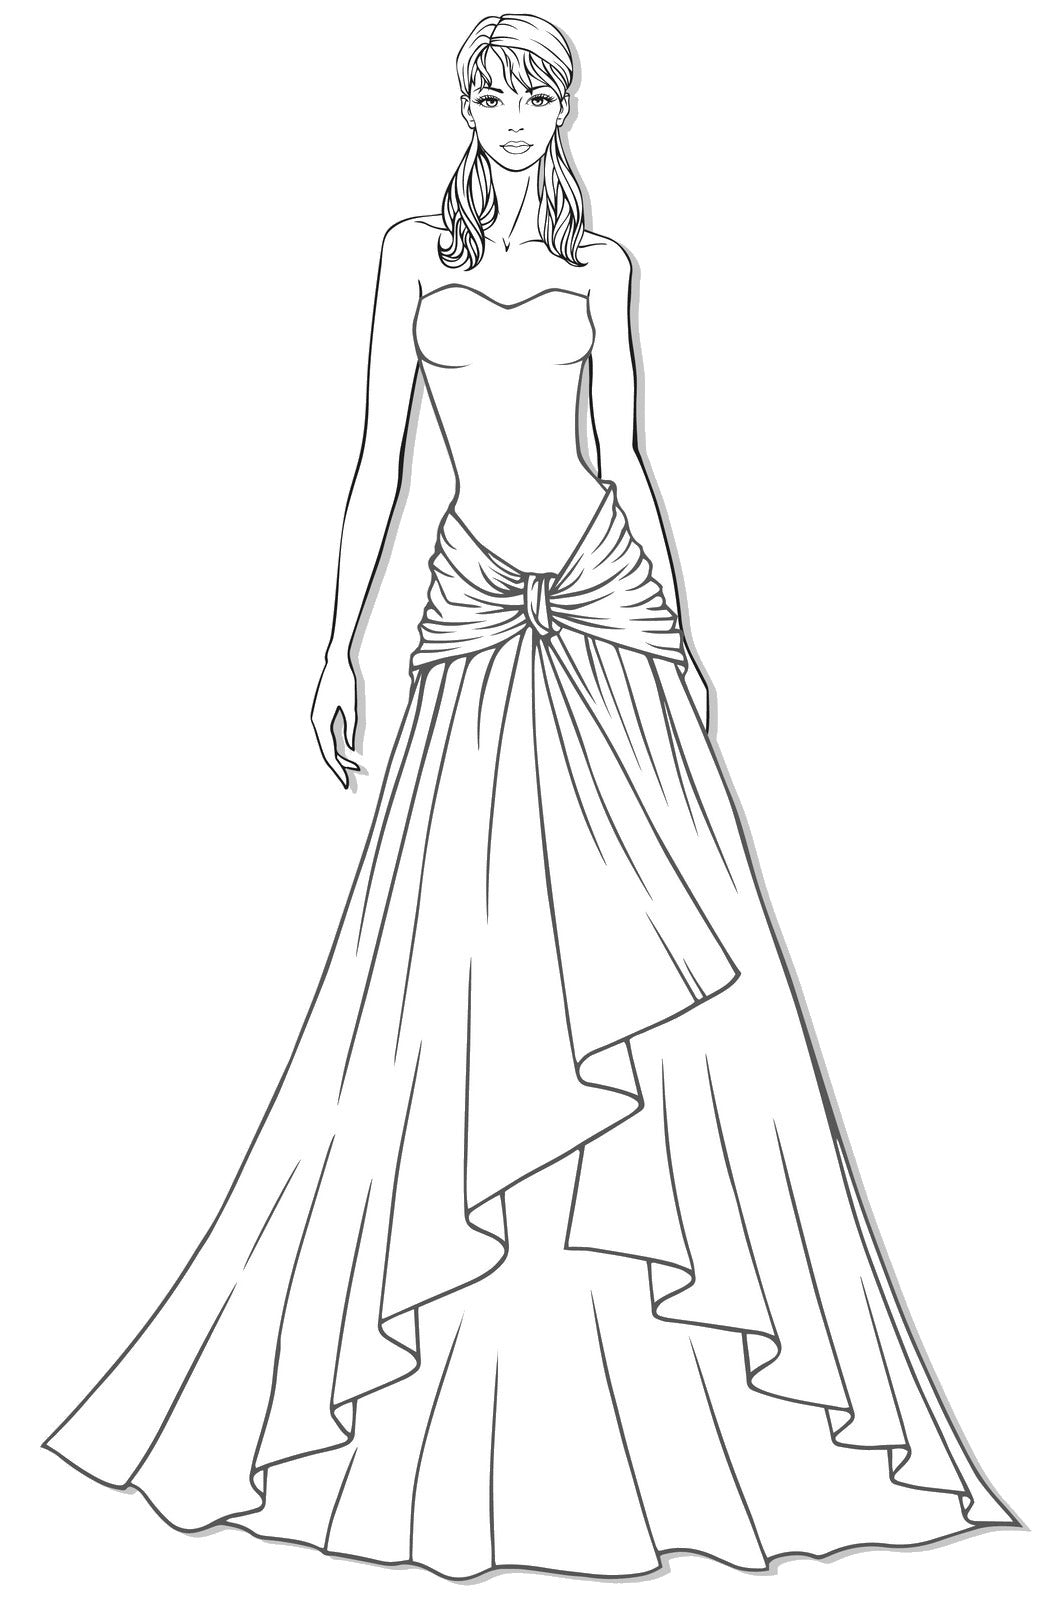 25+ Creative Picture of Dress Coloring Pages - entitlementtrap.com |  Wedding dress drawings, Disney princess coloring pages, Gown drawing